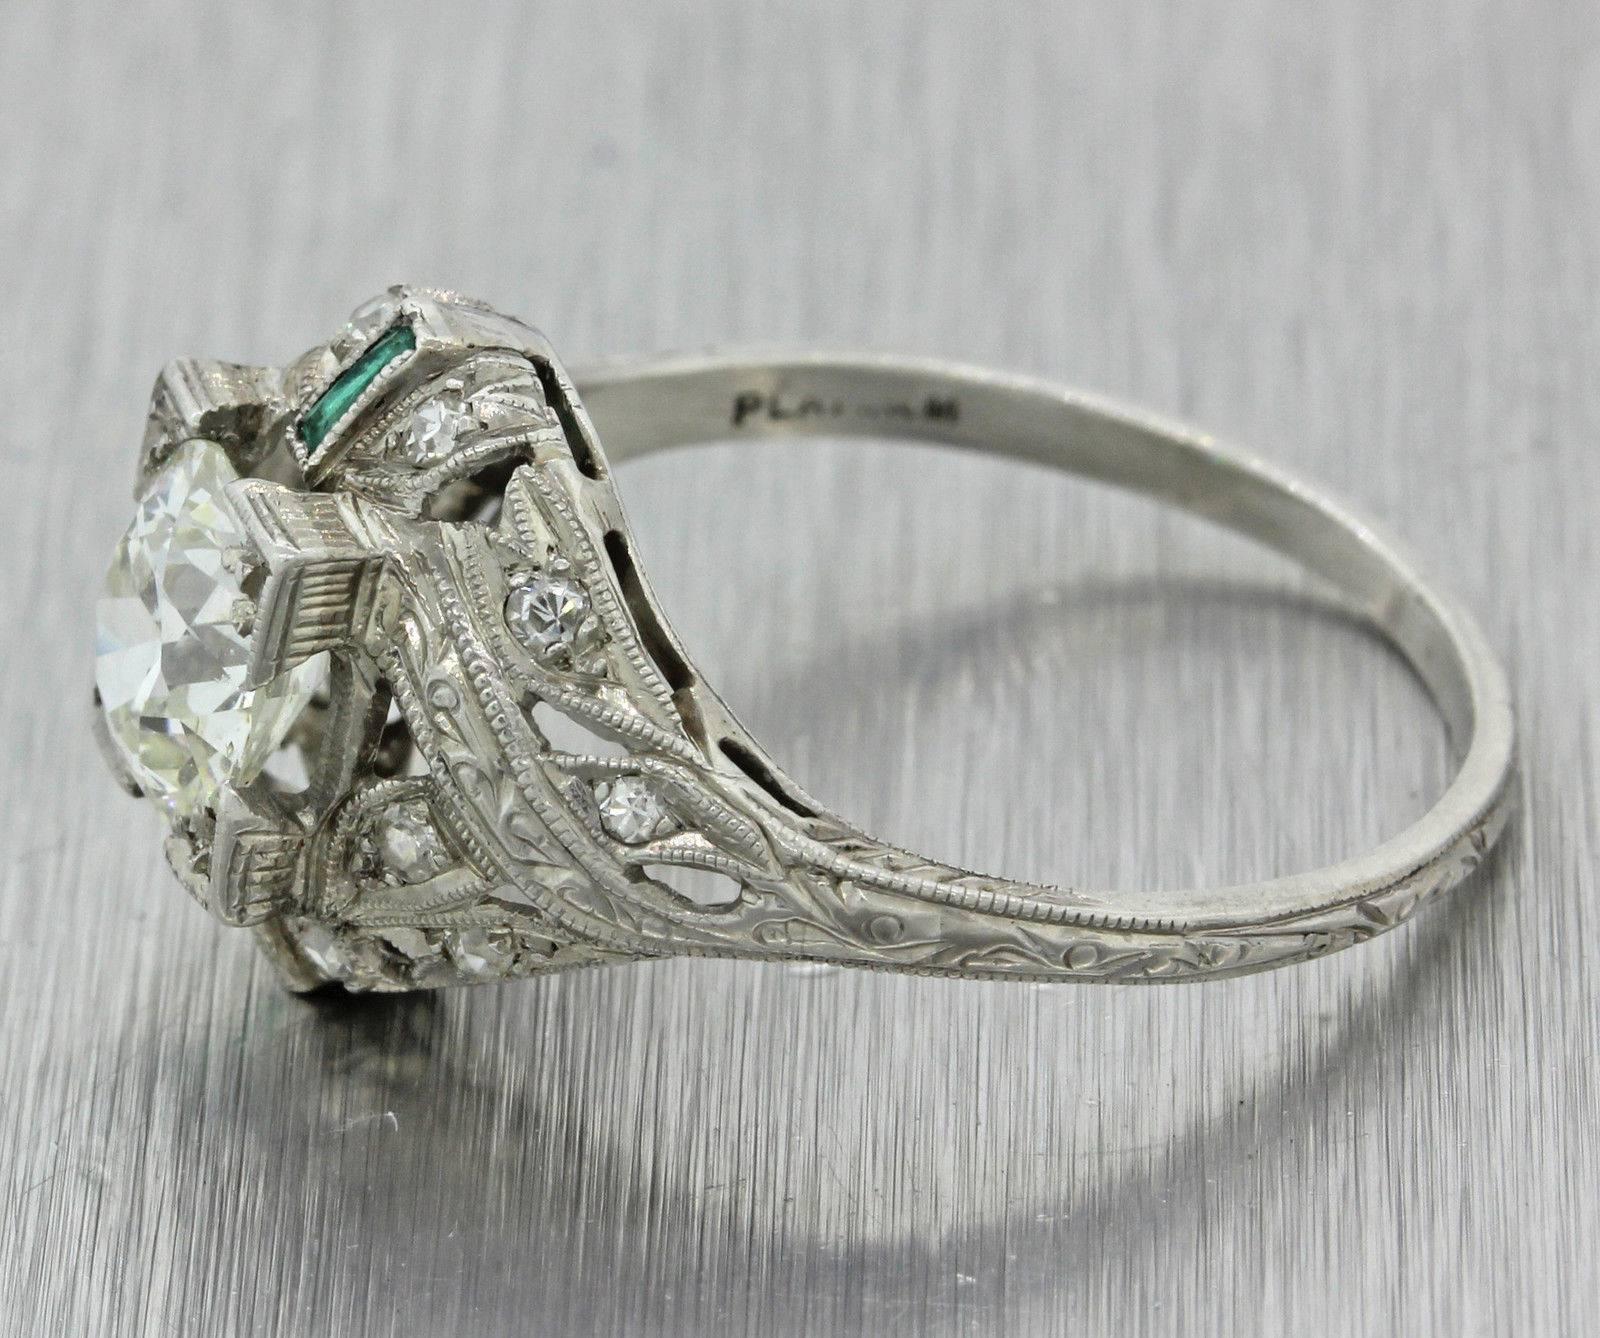 1920s Antique Art Deco 1.51 Carat EGL Diamond Emerald Solid Platinum Ring In Excellent Condition For Sale In Huntington, NY